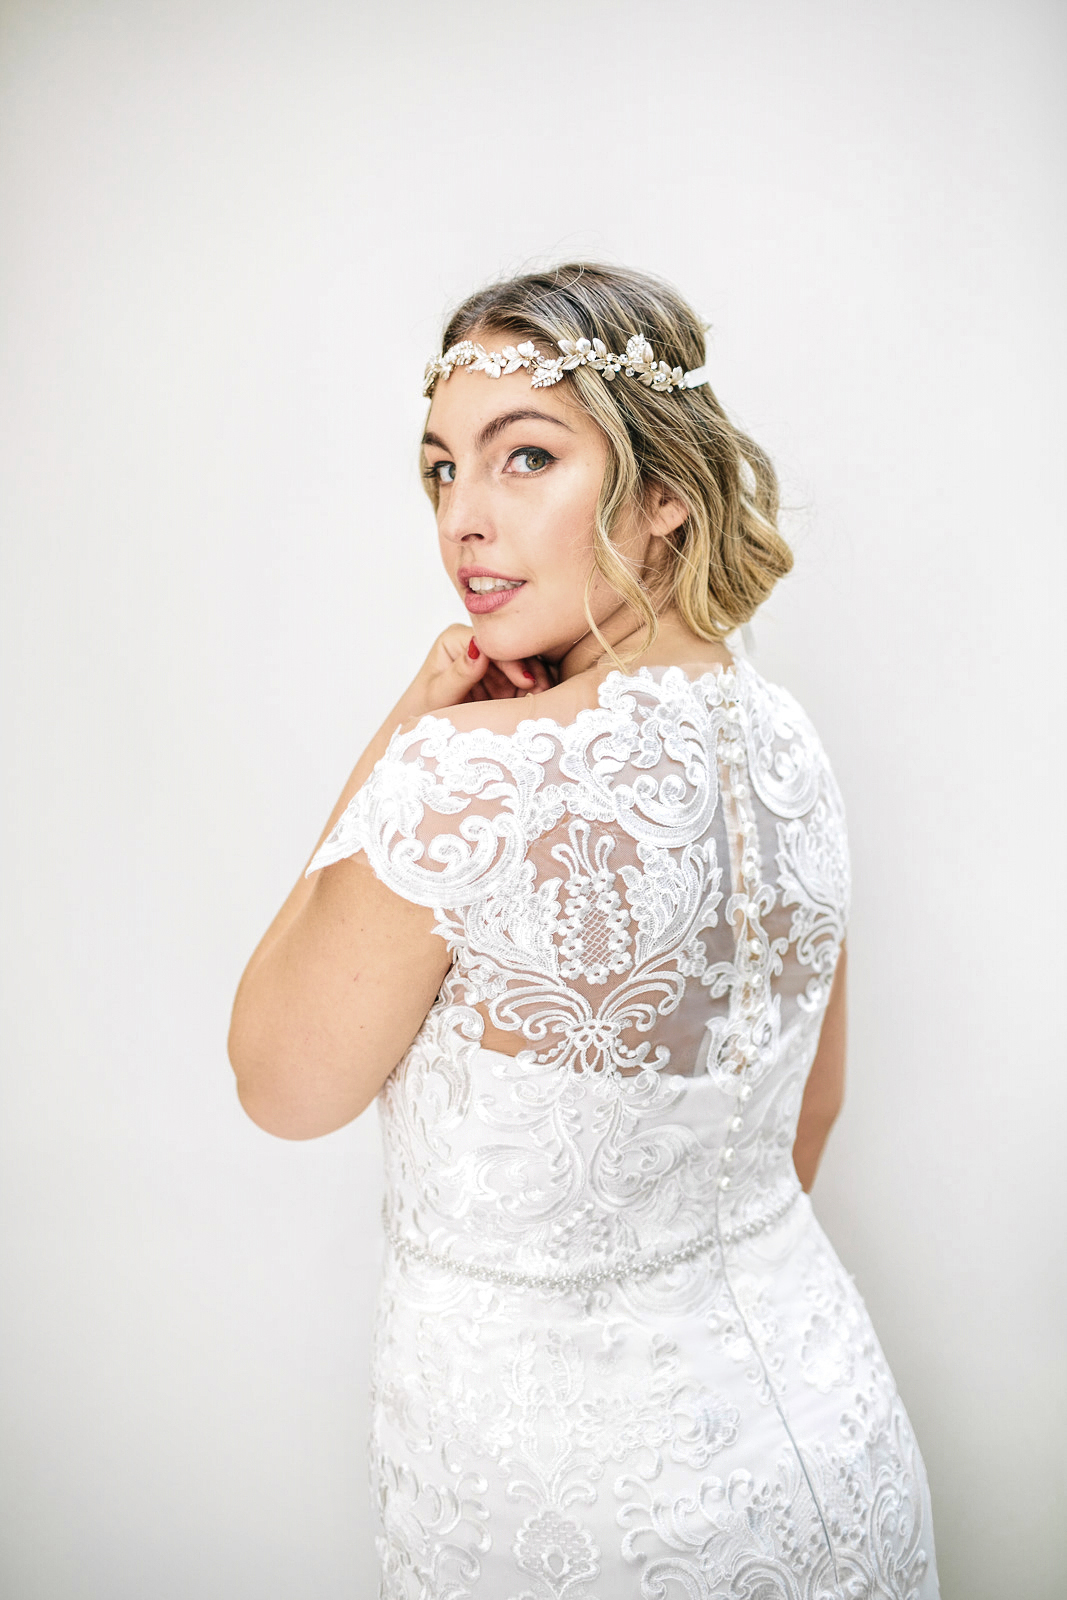 FASHION FRIDAY | New Collection Just for Indie Curvy Brides Arrives at Lovely Bride | Pretty Pear Bride